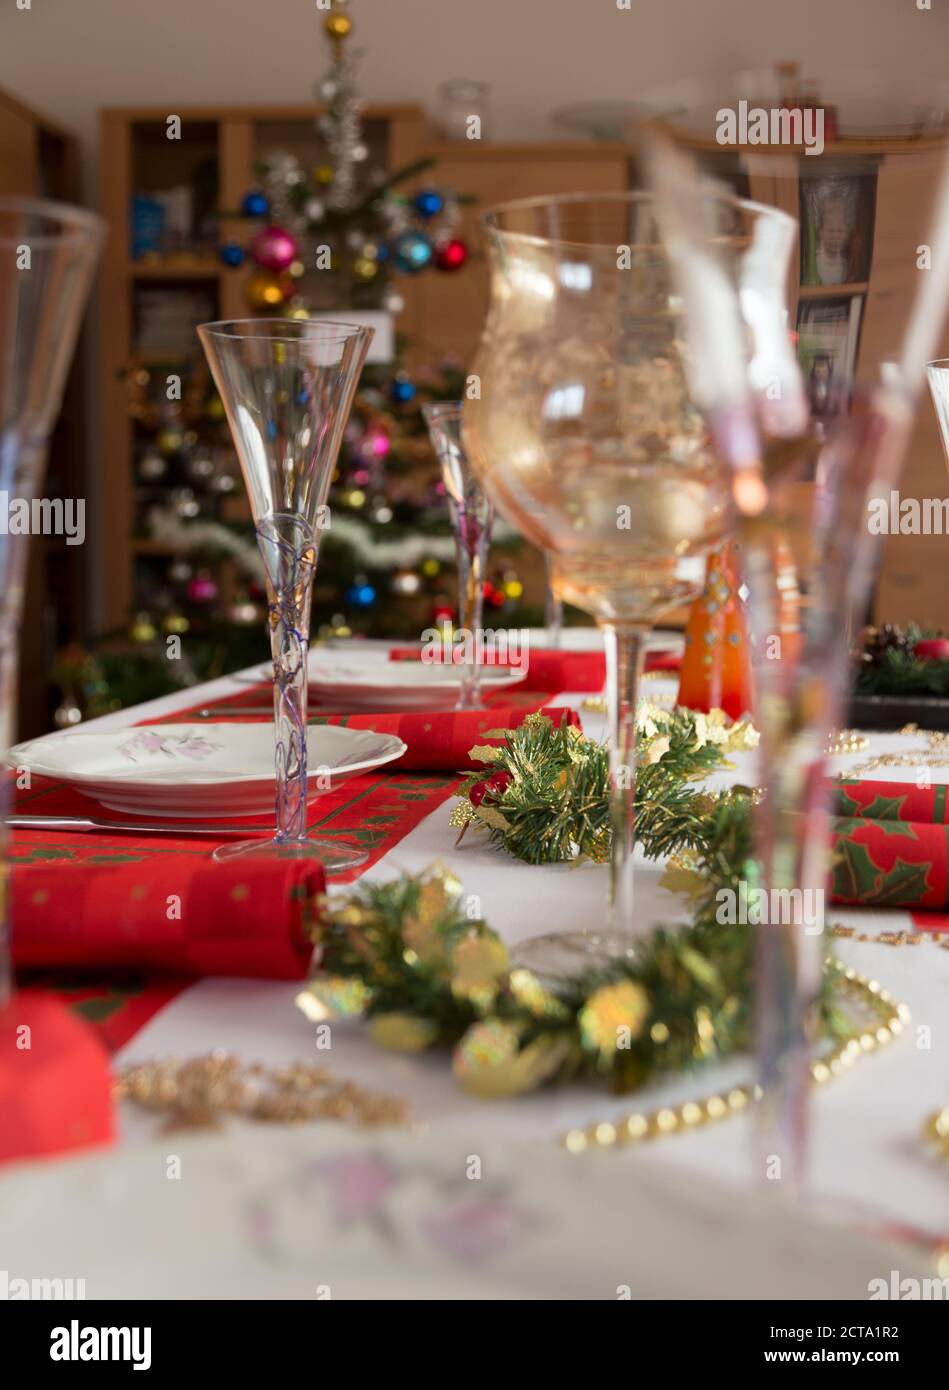 Rose wine glasses and bottles on table served for festive dinner party  Stock Photo by Olga_Kochina